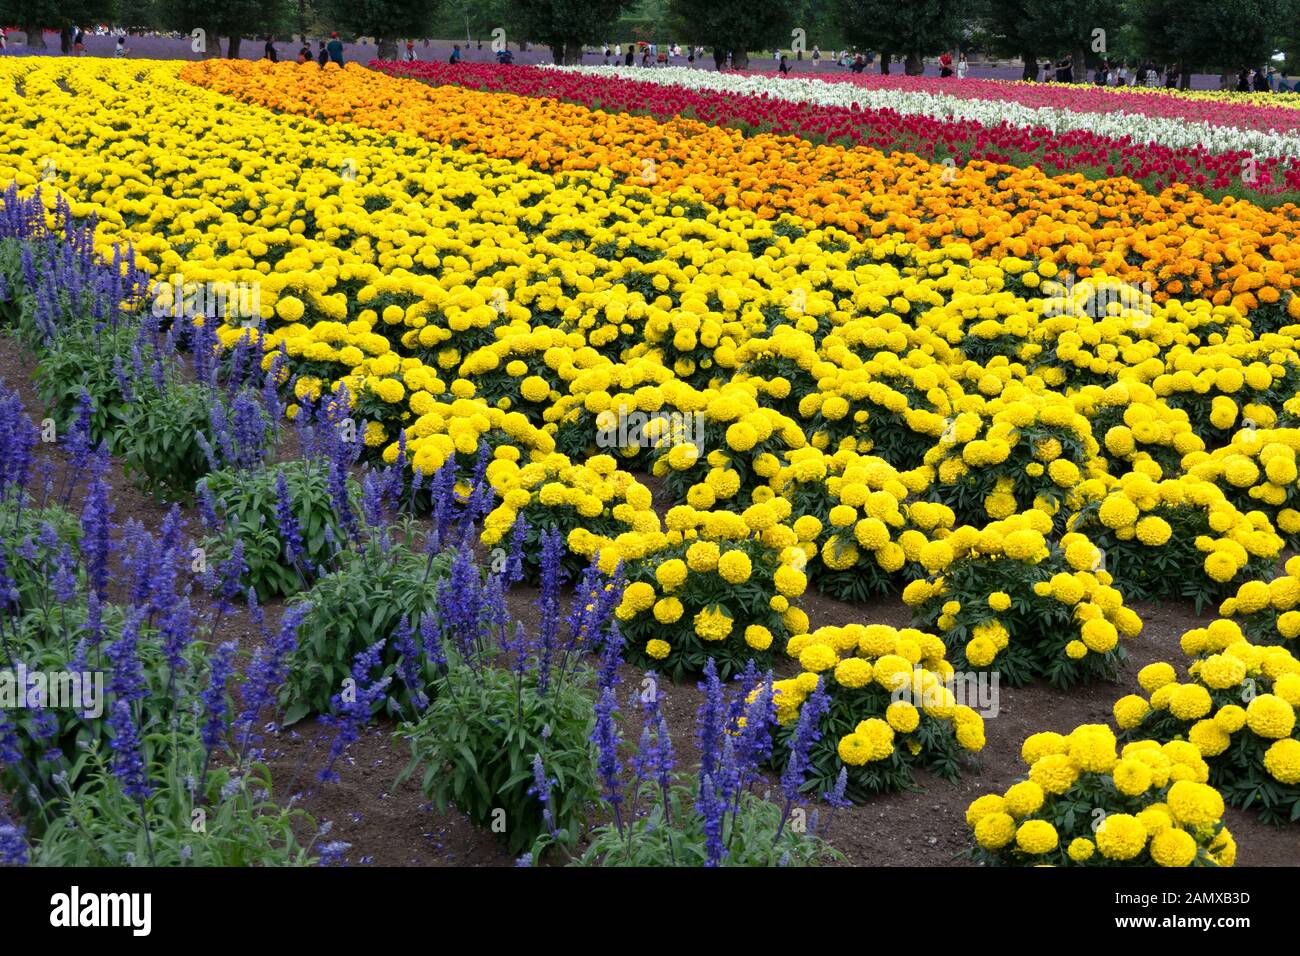 https://c8.alamy.com/comp/2AMXB3D/view-of-flower-field-at-farm-tomita-famous-tourist-attraction-in-nakafurano-hokkaido-japan-asia-flowers-blossoming-in-fields-2AMXB3D.jpg